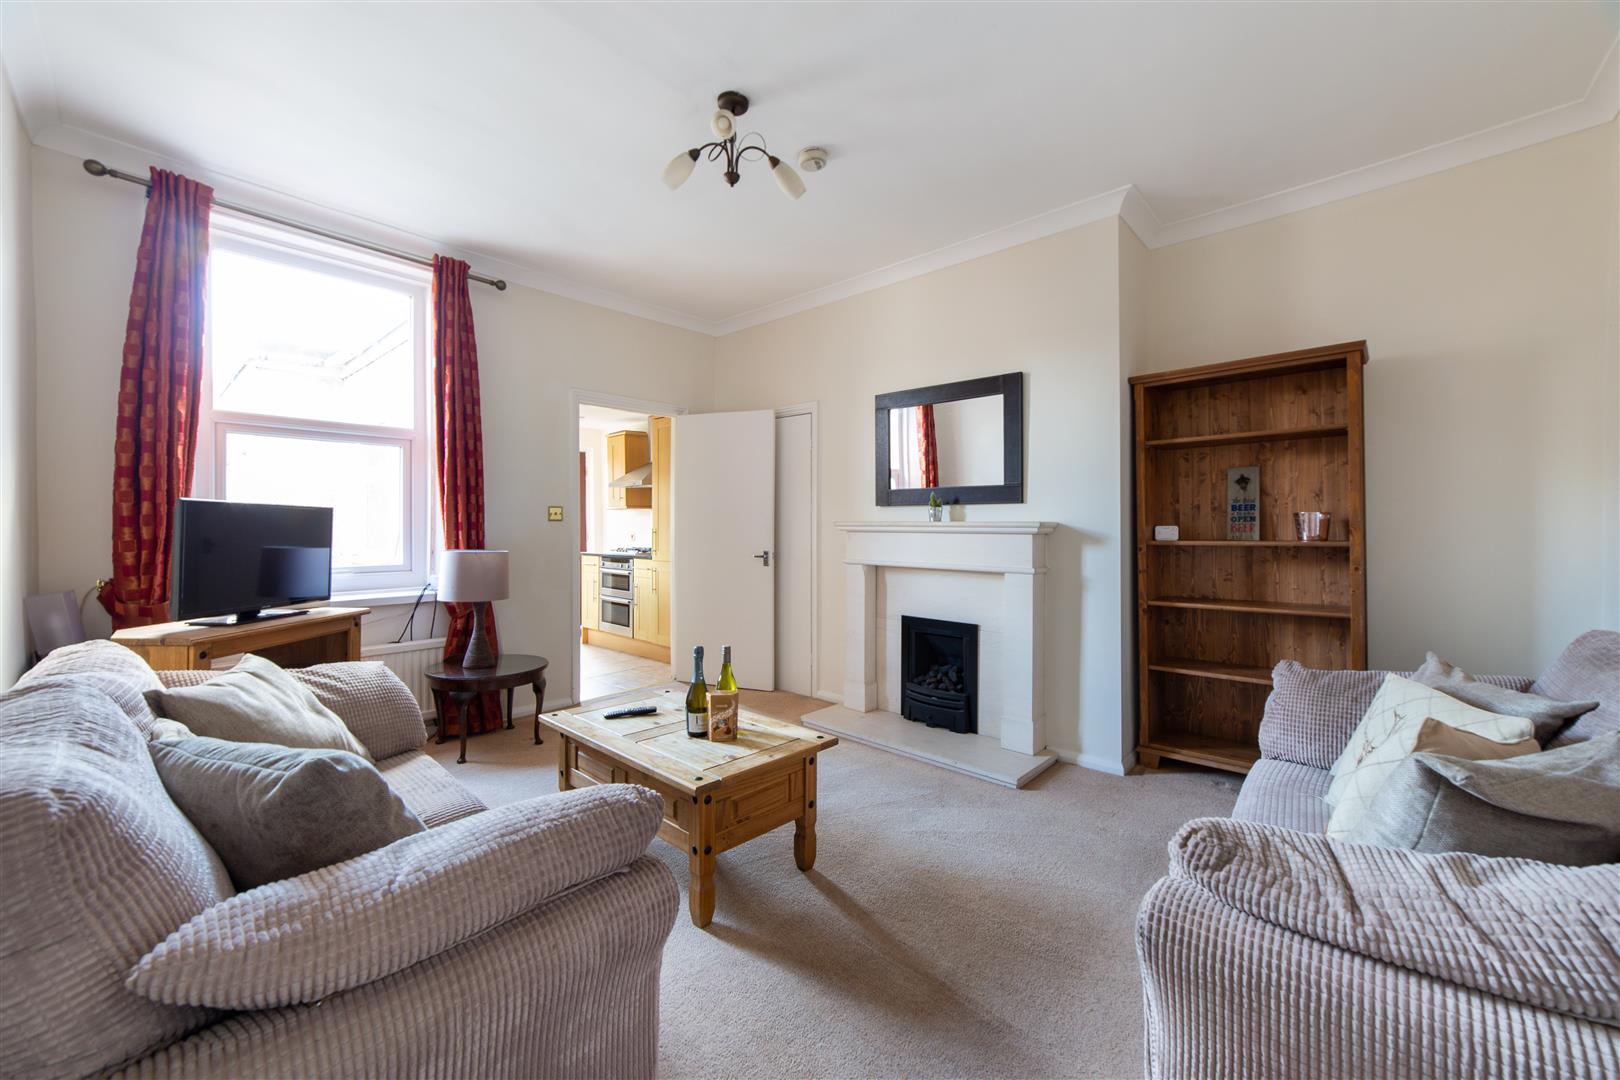 3 bed flat to rent in Mowbray Street, Newcastle Upon Tyne - Property Image 1